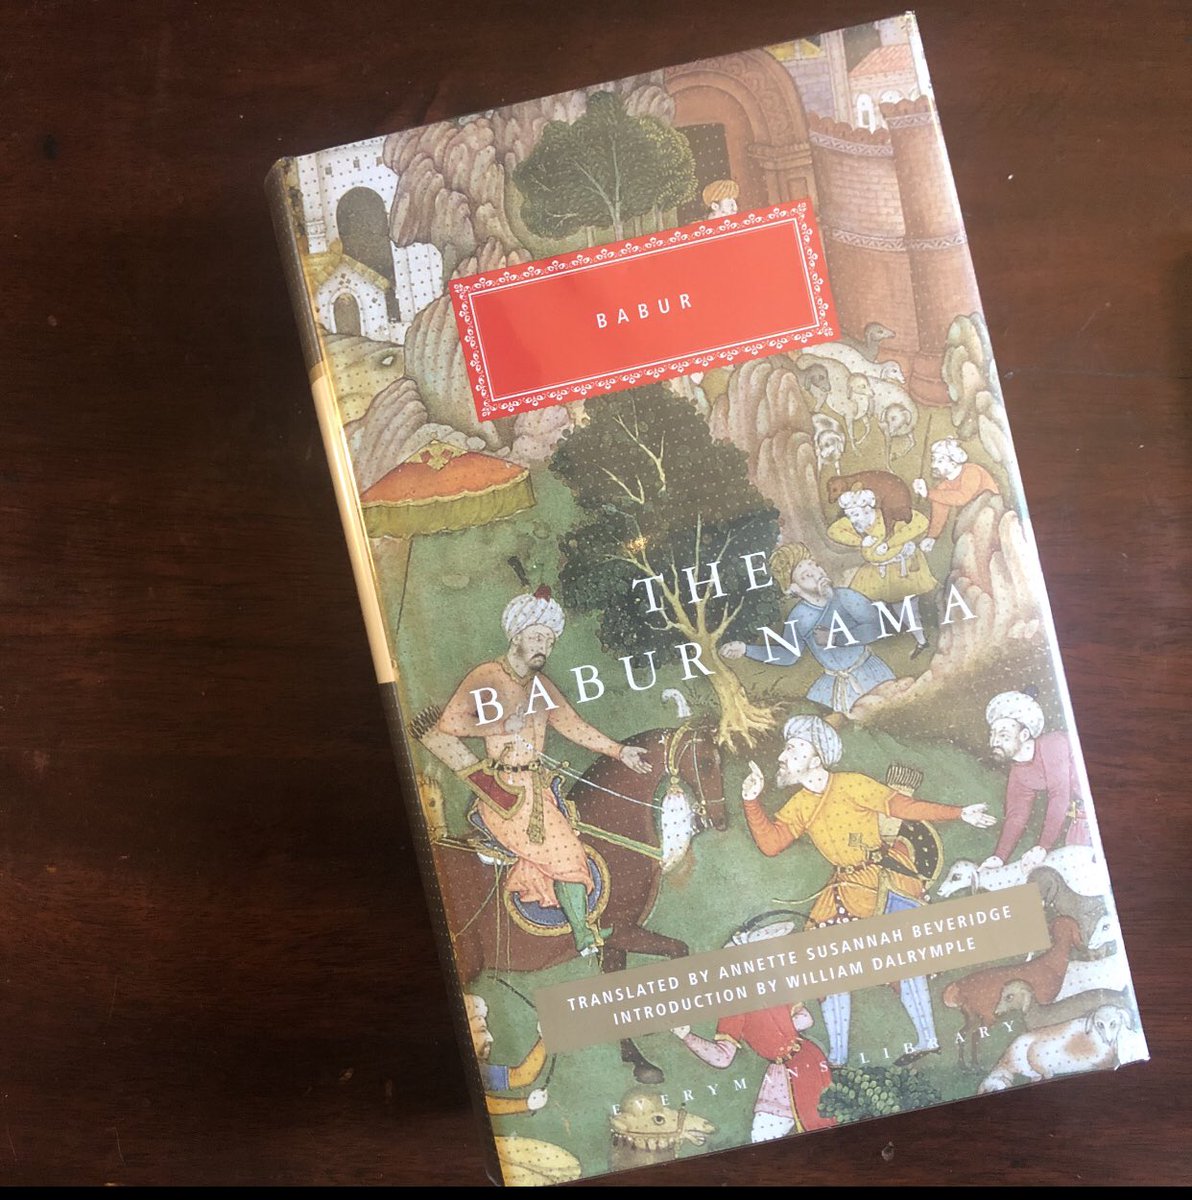 Babur’s own Tuzuk-i Baburi, or the Bāburnama remains the best primary source for a study of the Emperor’s life; an incredibly human, self-deprecating and candid diary.A new edition of Annette Beveridge’s translation with an introduction by  @DalrympleWill is now available.